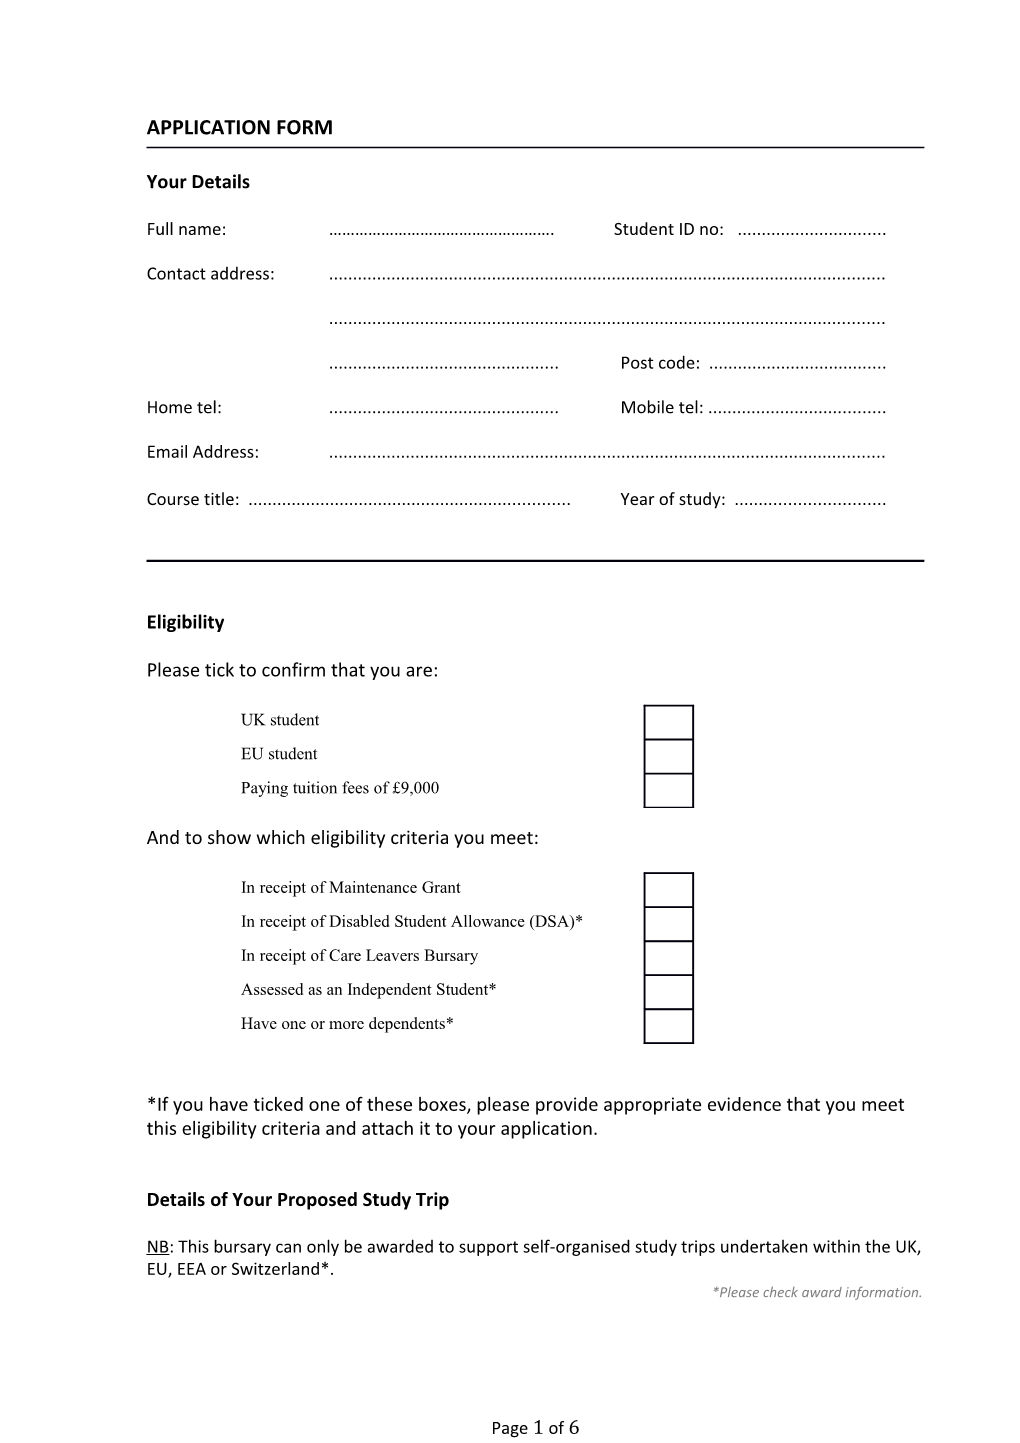 Standard Document Template (Up to 5 Pages)